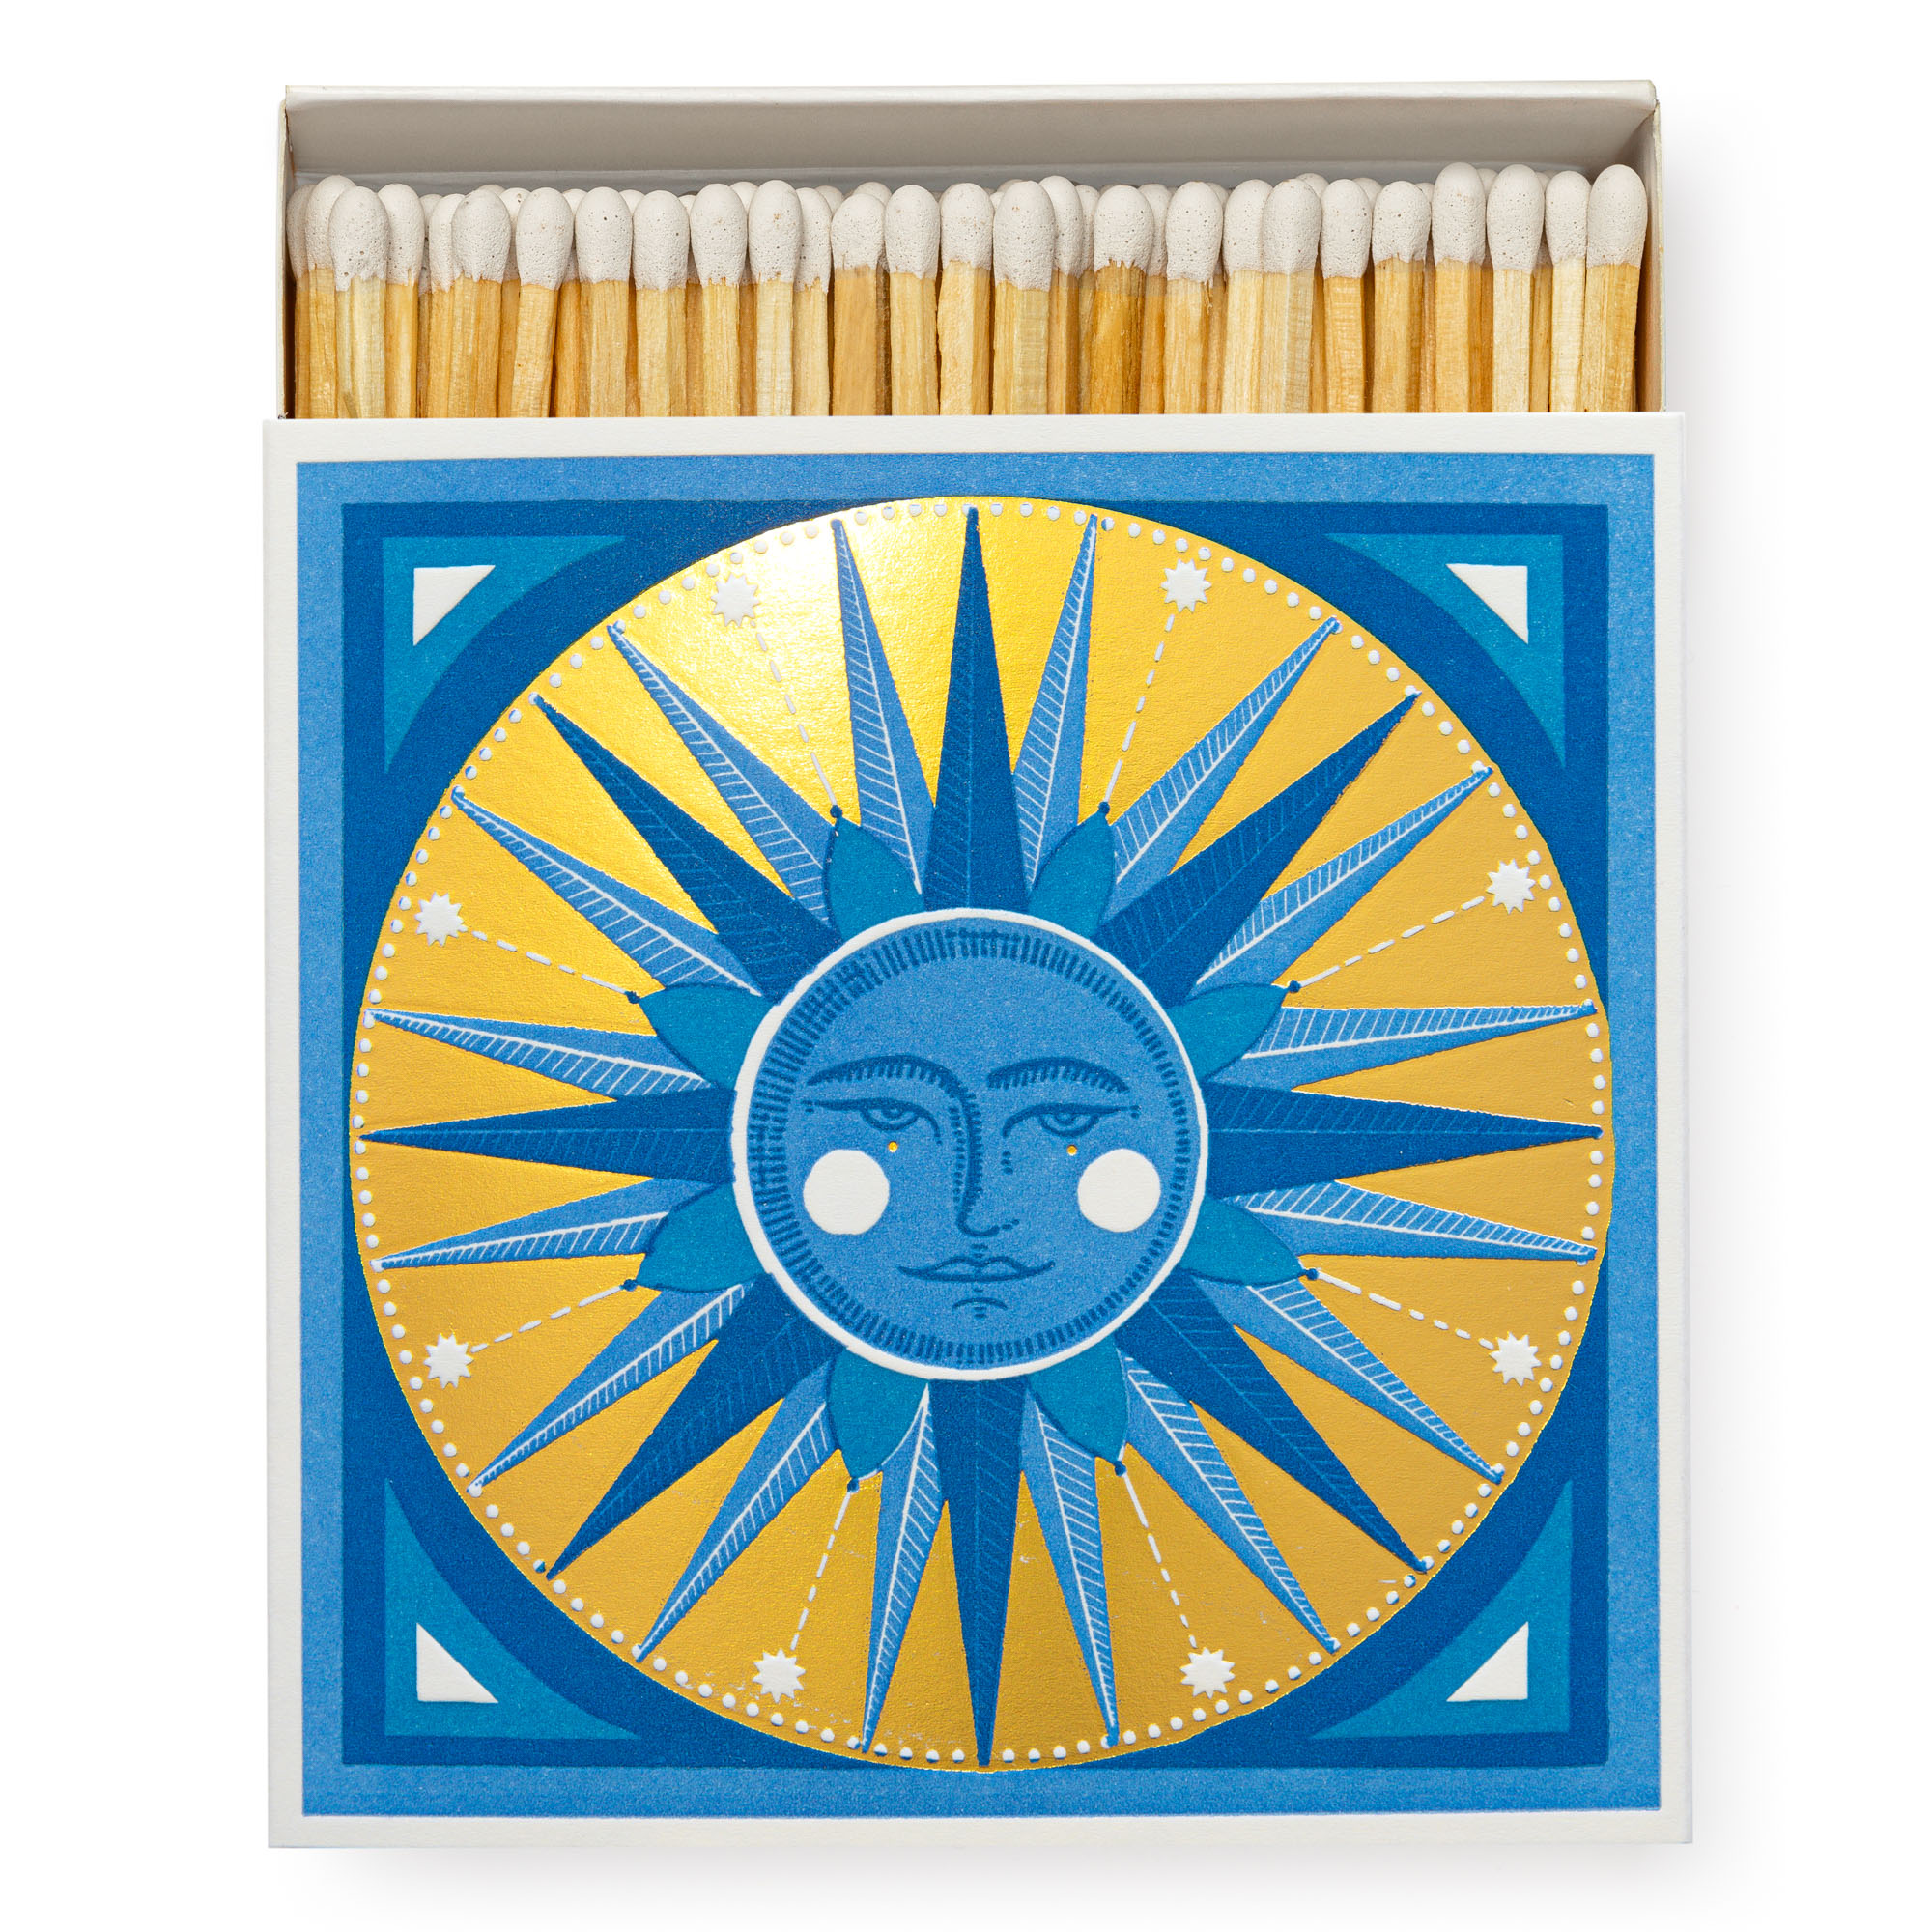 Golden Sun - Square Matchboxes - Ariane Butto - from Archivist Gallery 